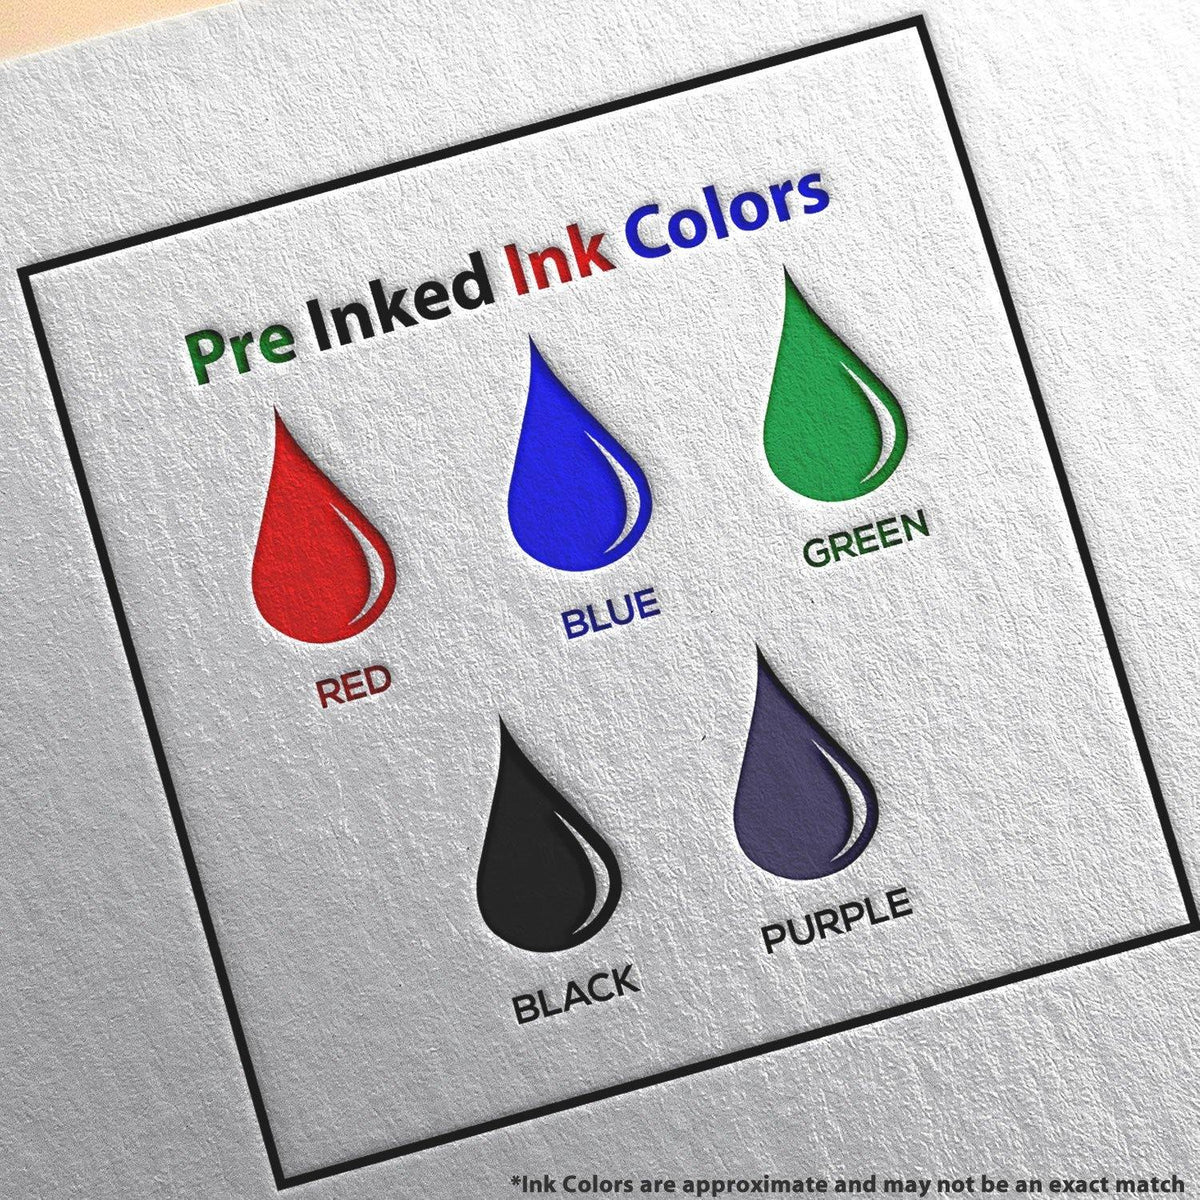 Large Pre Inked Validate Only Stamp Ink Color Options